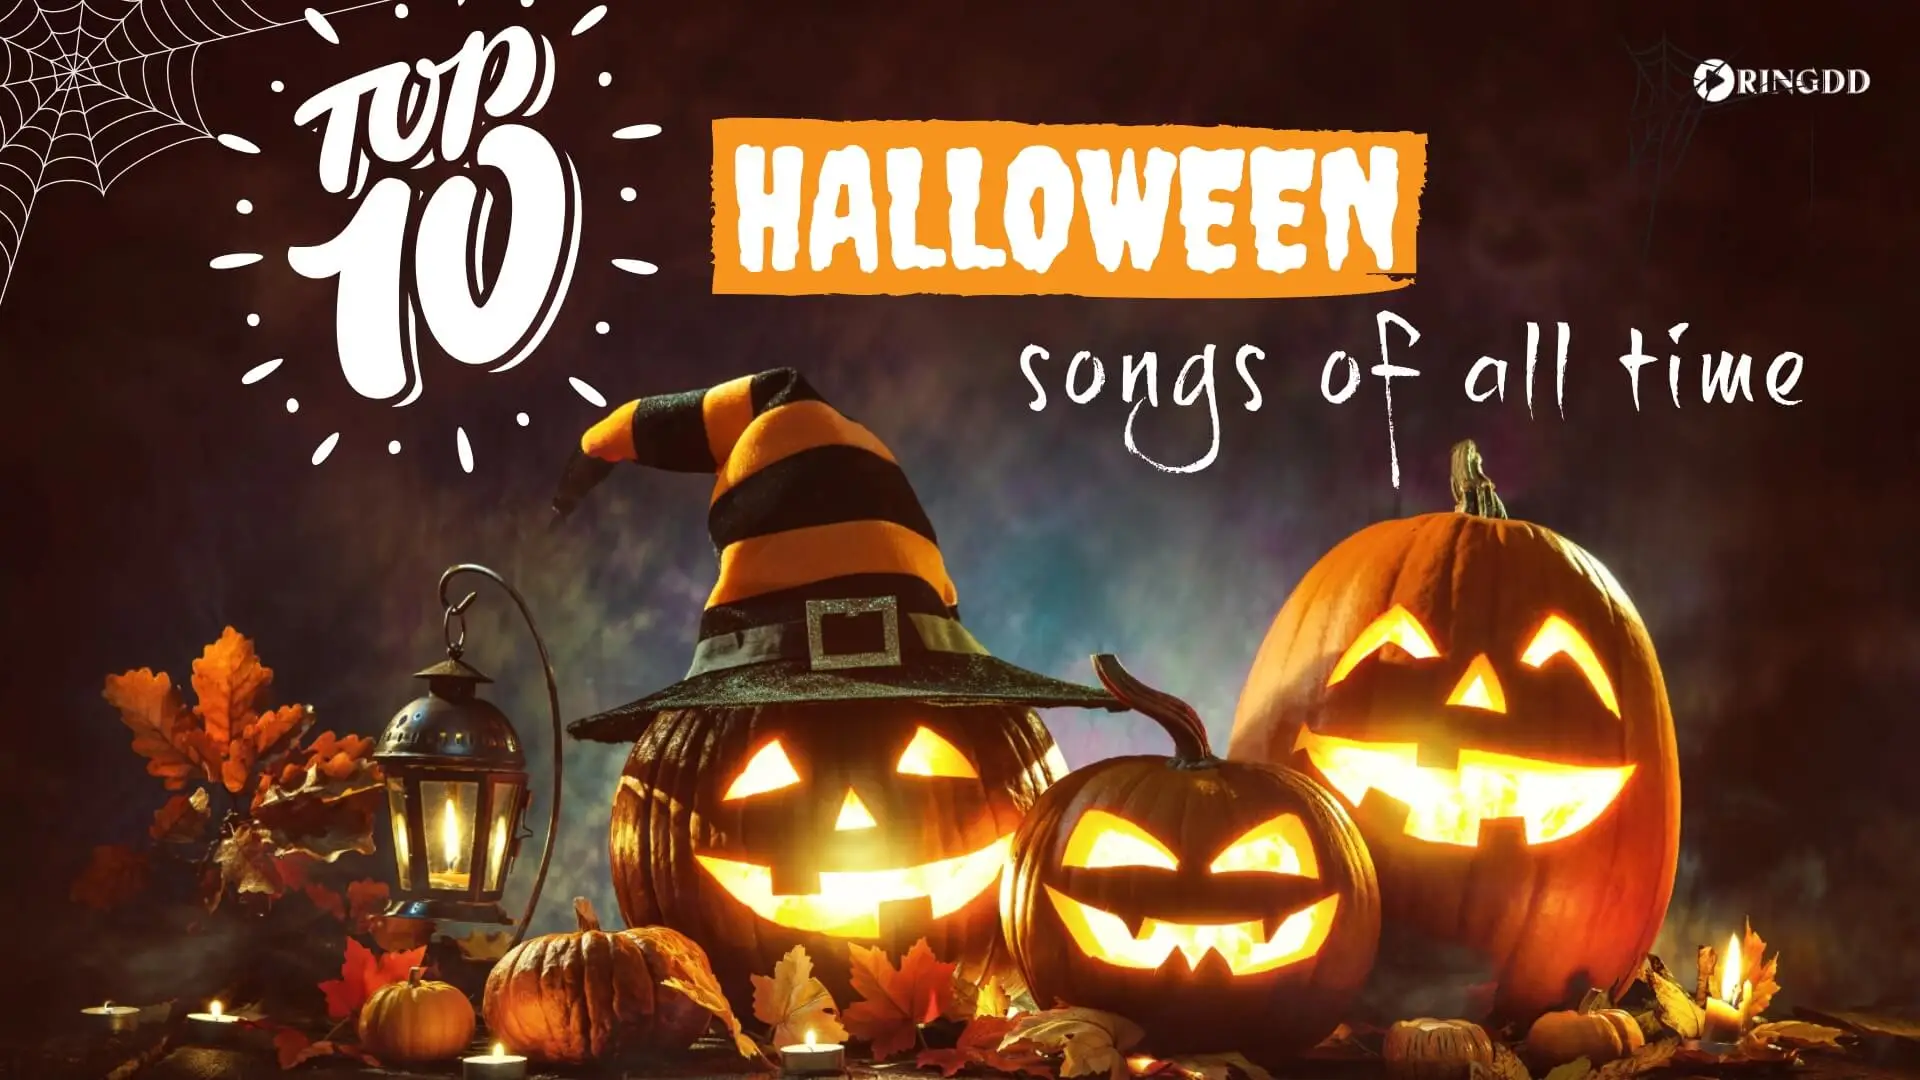 Top 10 halloween songs of all time for your party playlist